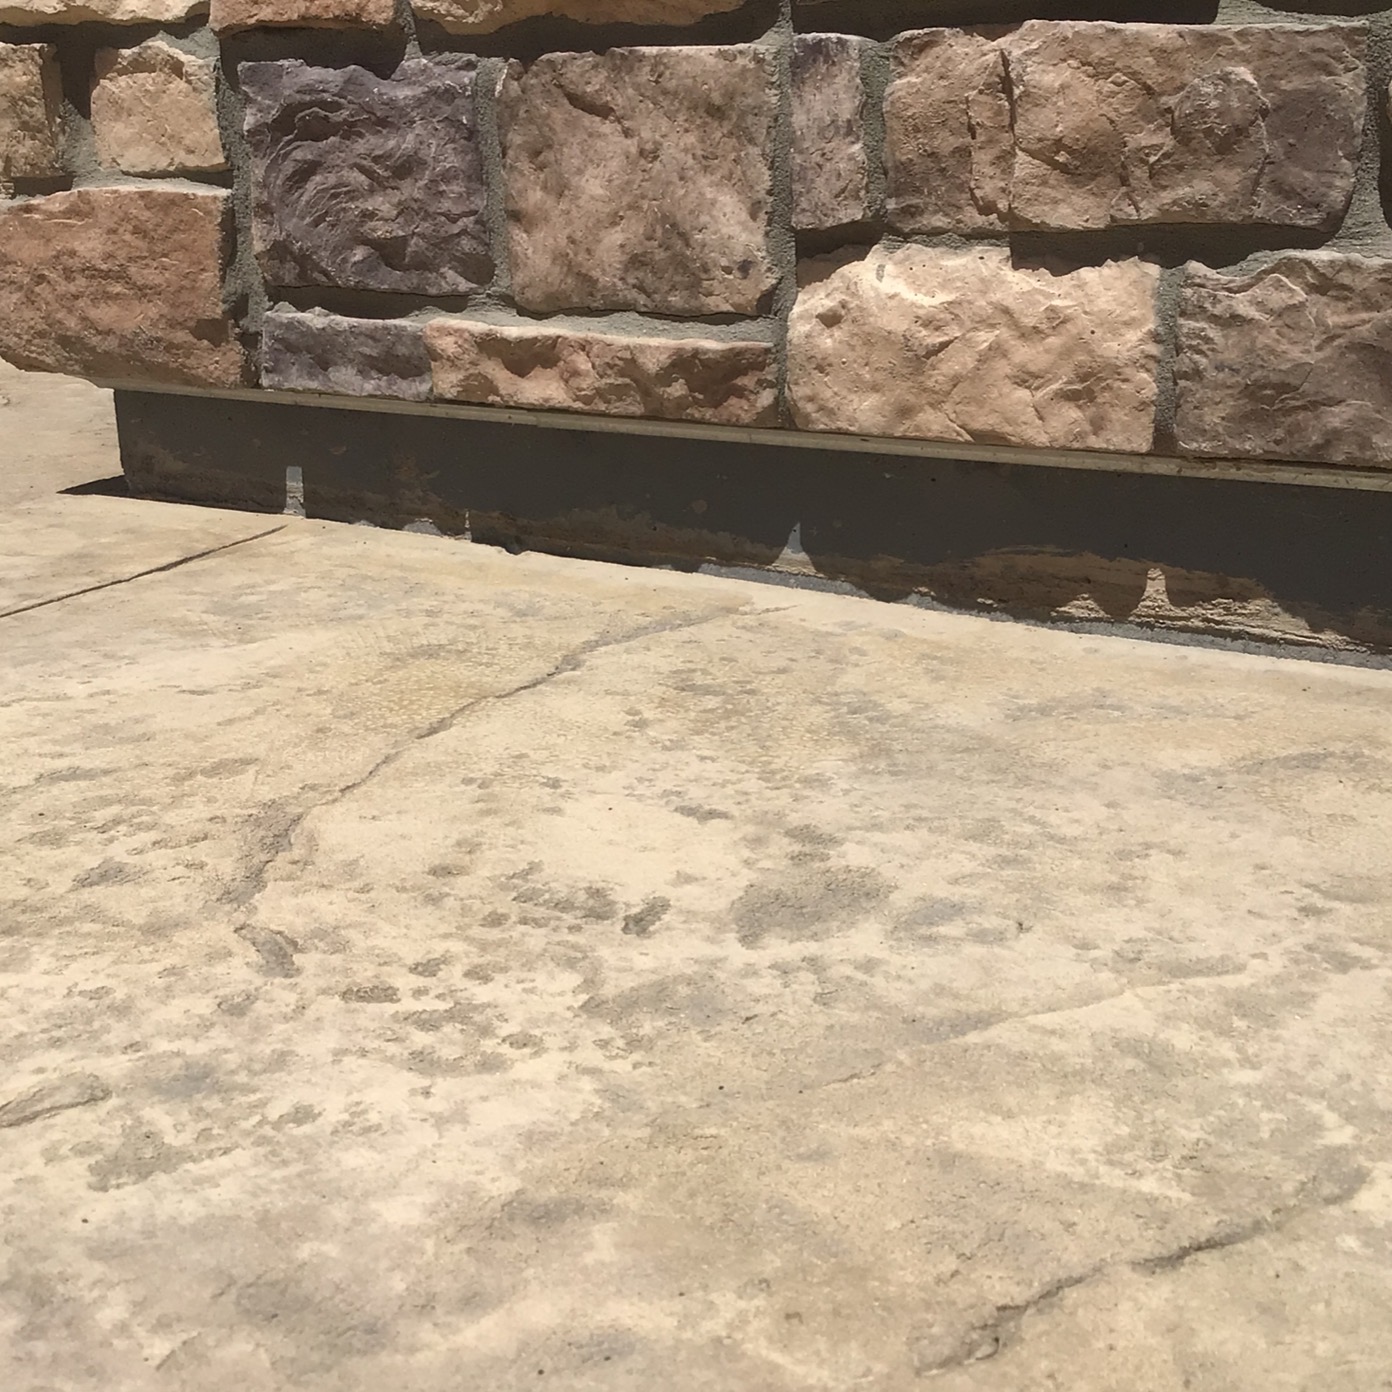 Is your concrete letting you down in colorado? Liftech can help